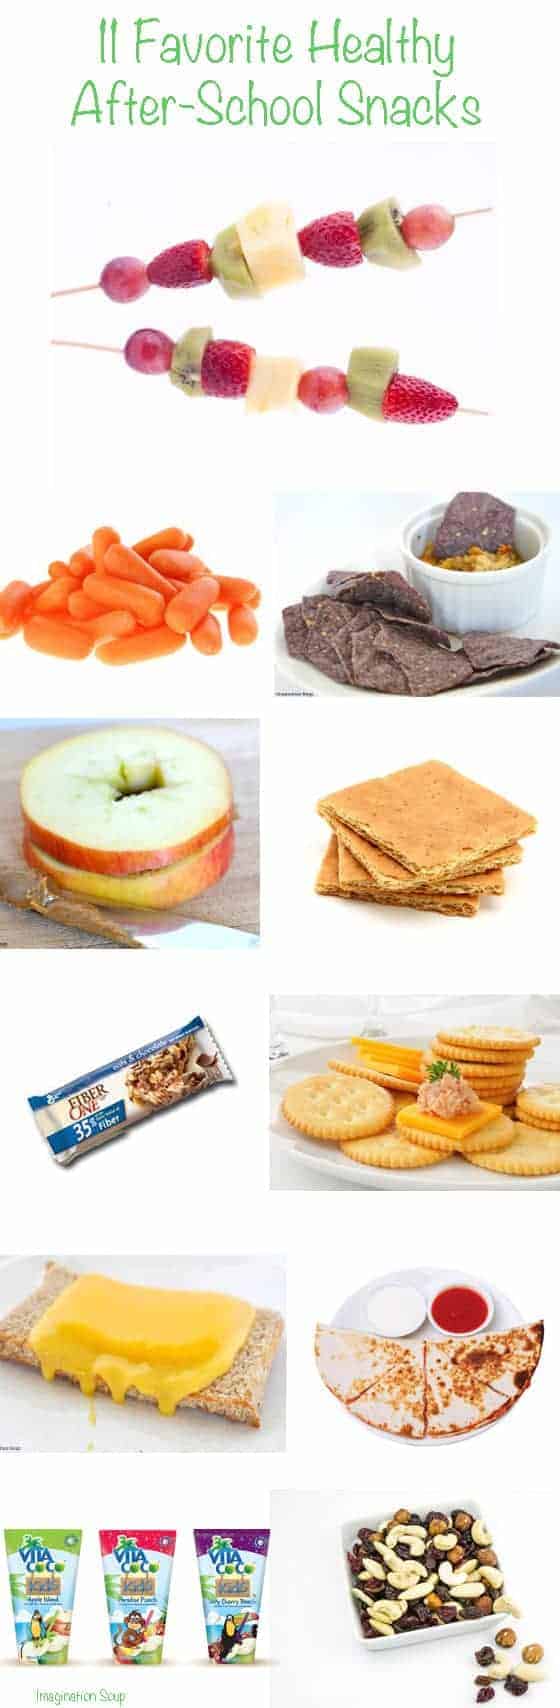 11 favorite after-school snacks (that are healthy!)